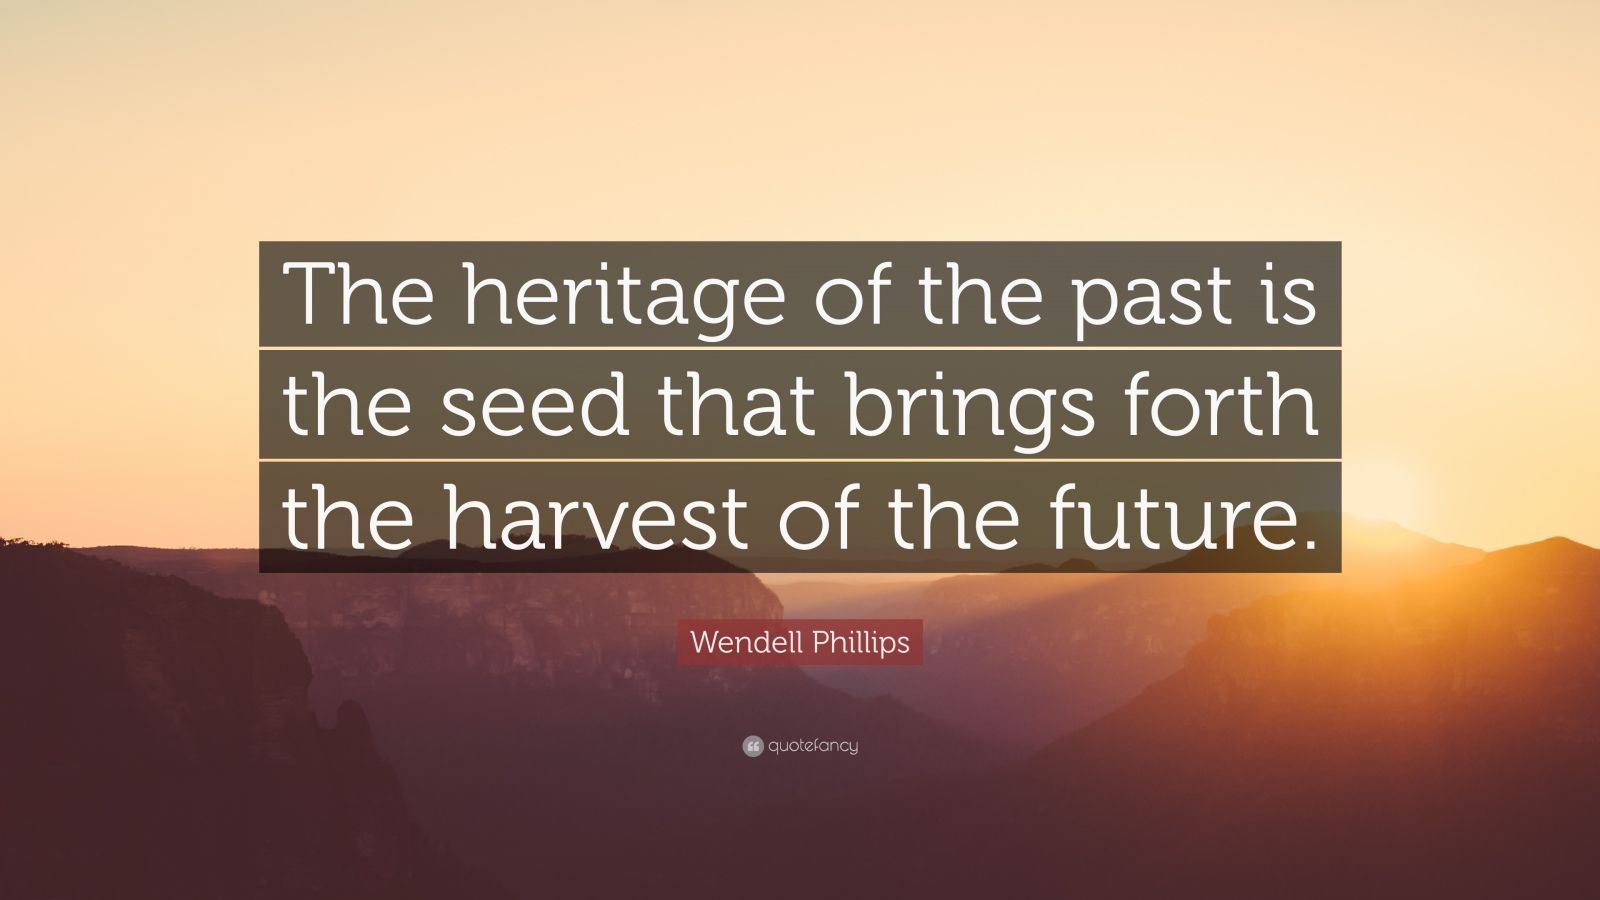 Wendell Phillips Quote: “The heritage of the past is the seed that